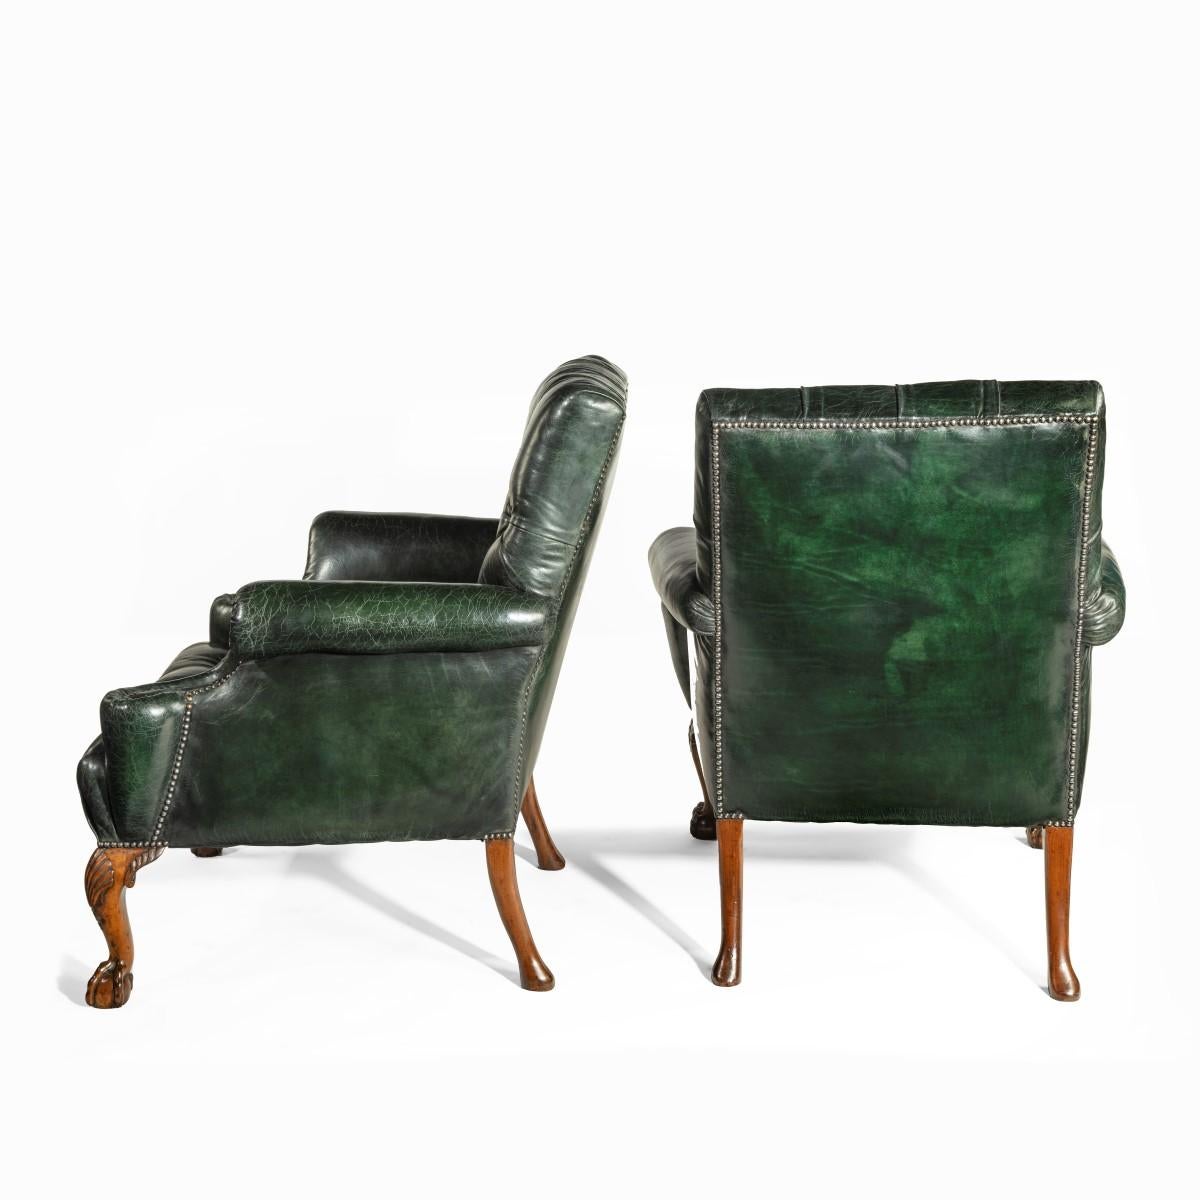 A pair of George II style walnut wing arm chairs, each with a generous back and seat with scrolling arms, reupholstered overall in deep green buttoned and distressed leather, the cabriole front legs carved with shells on the knees, the back legs